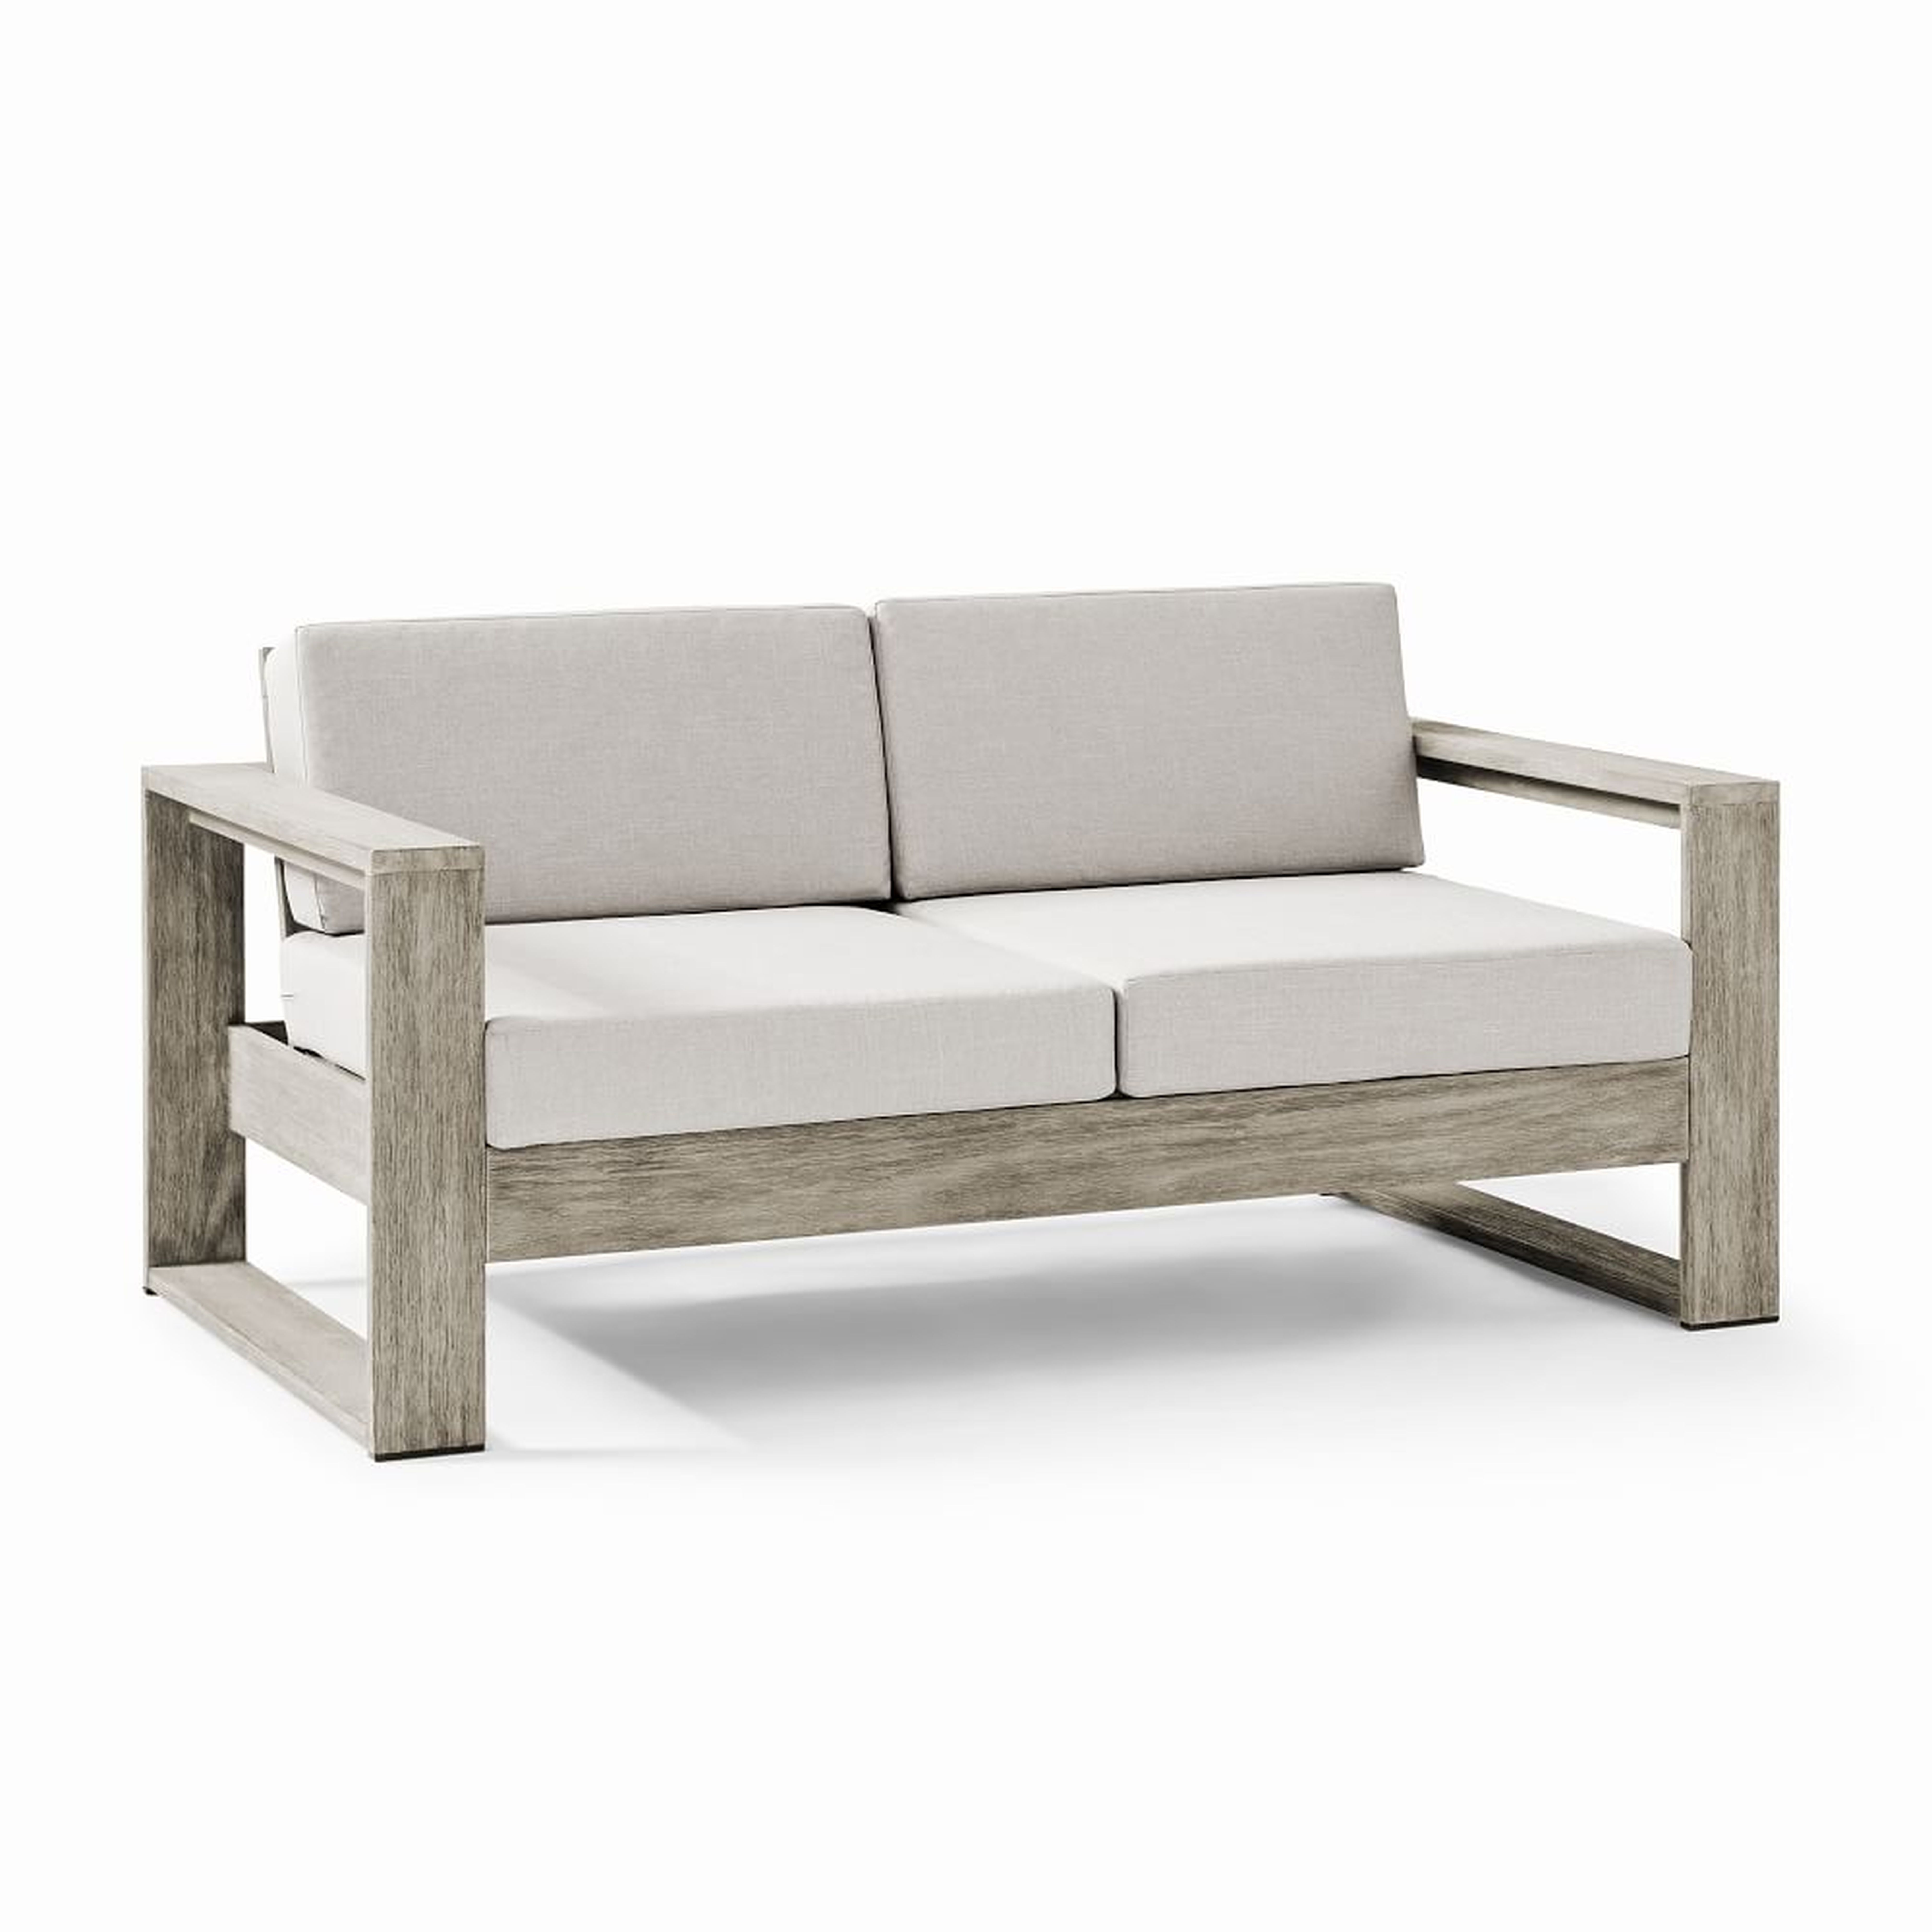 Portside Outdoor Loveseat, Weathered Gray - West Elm